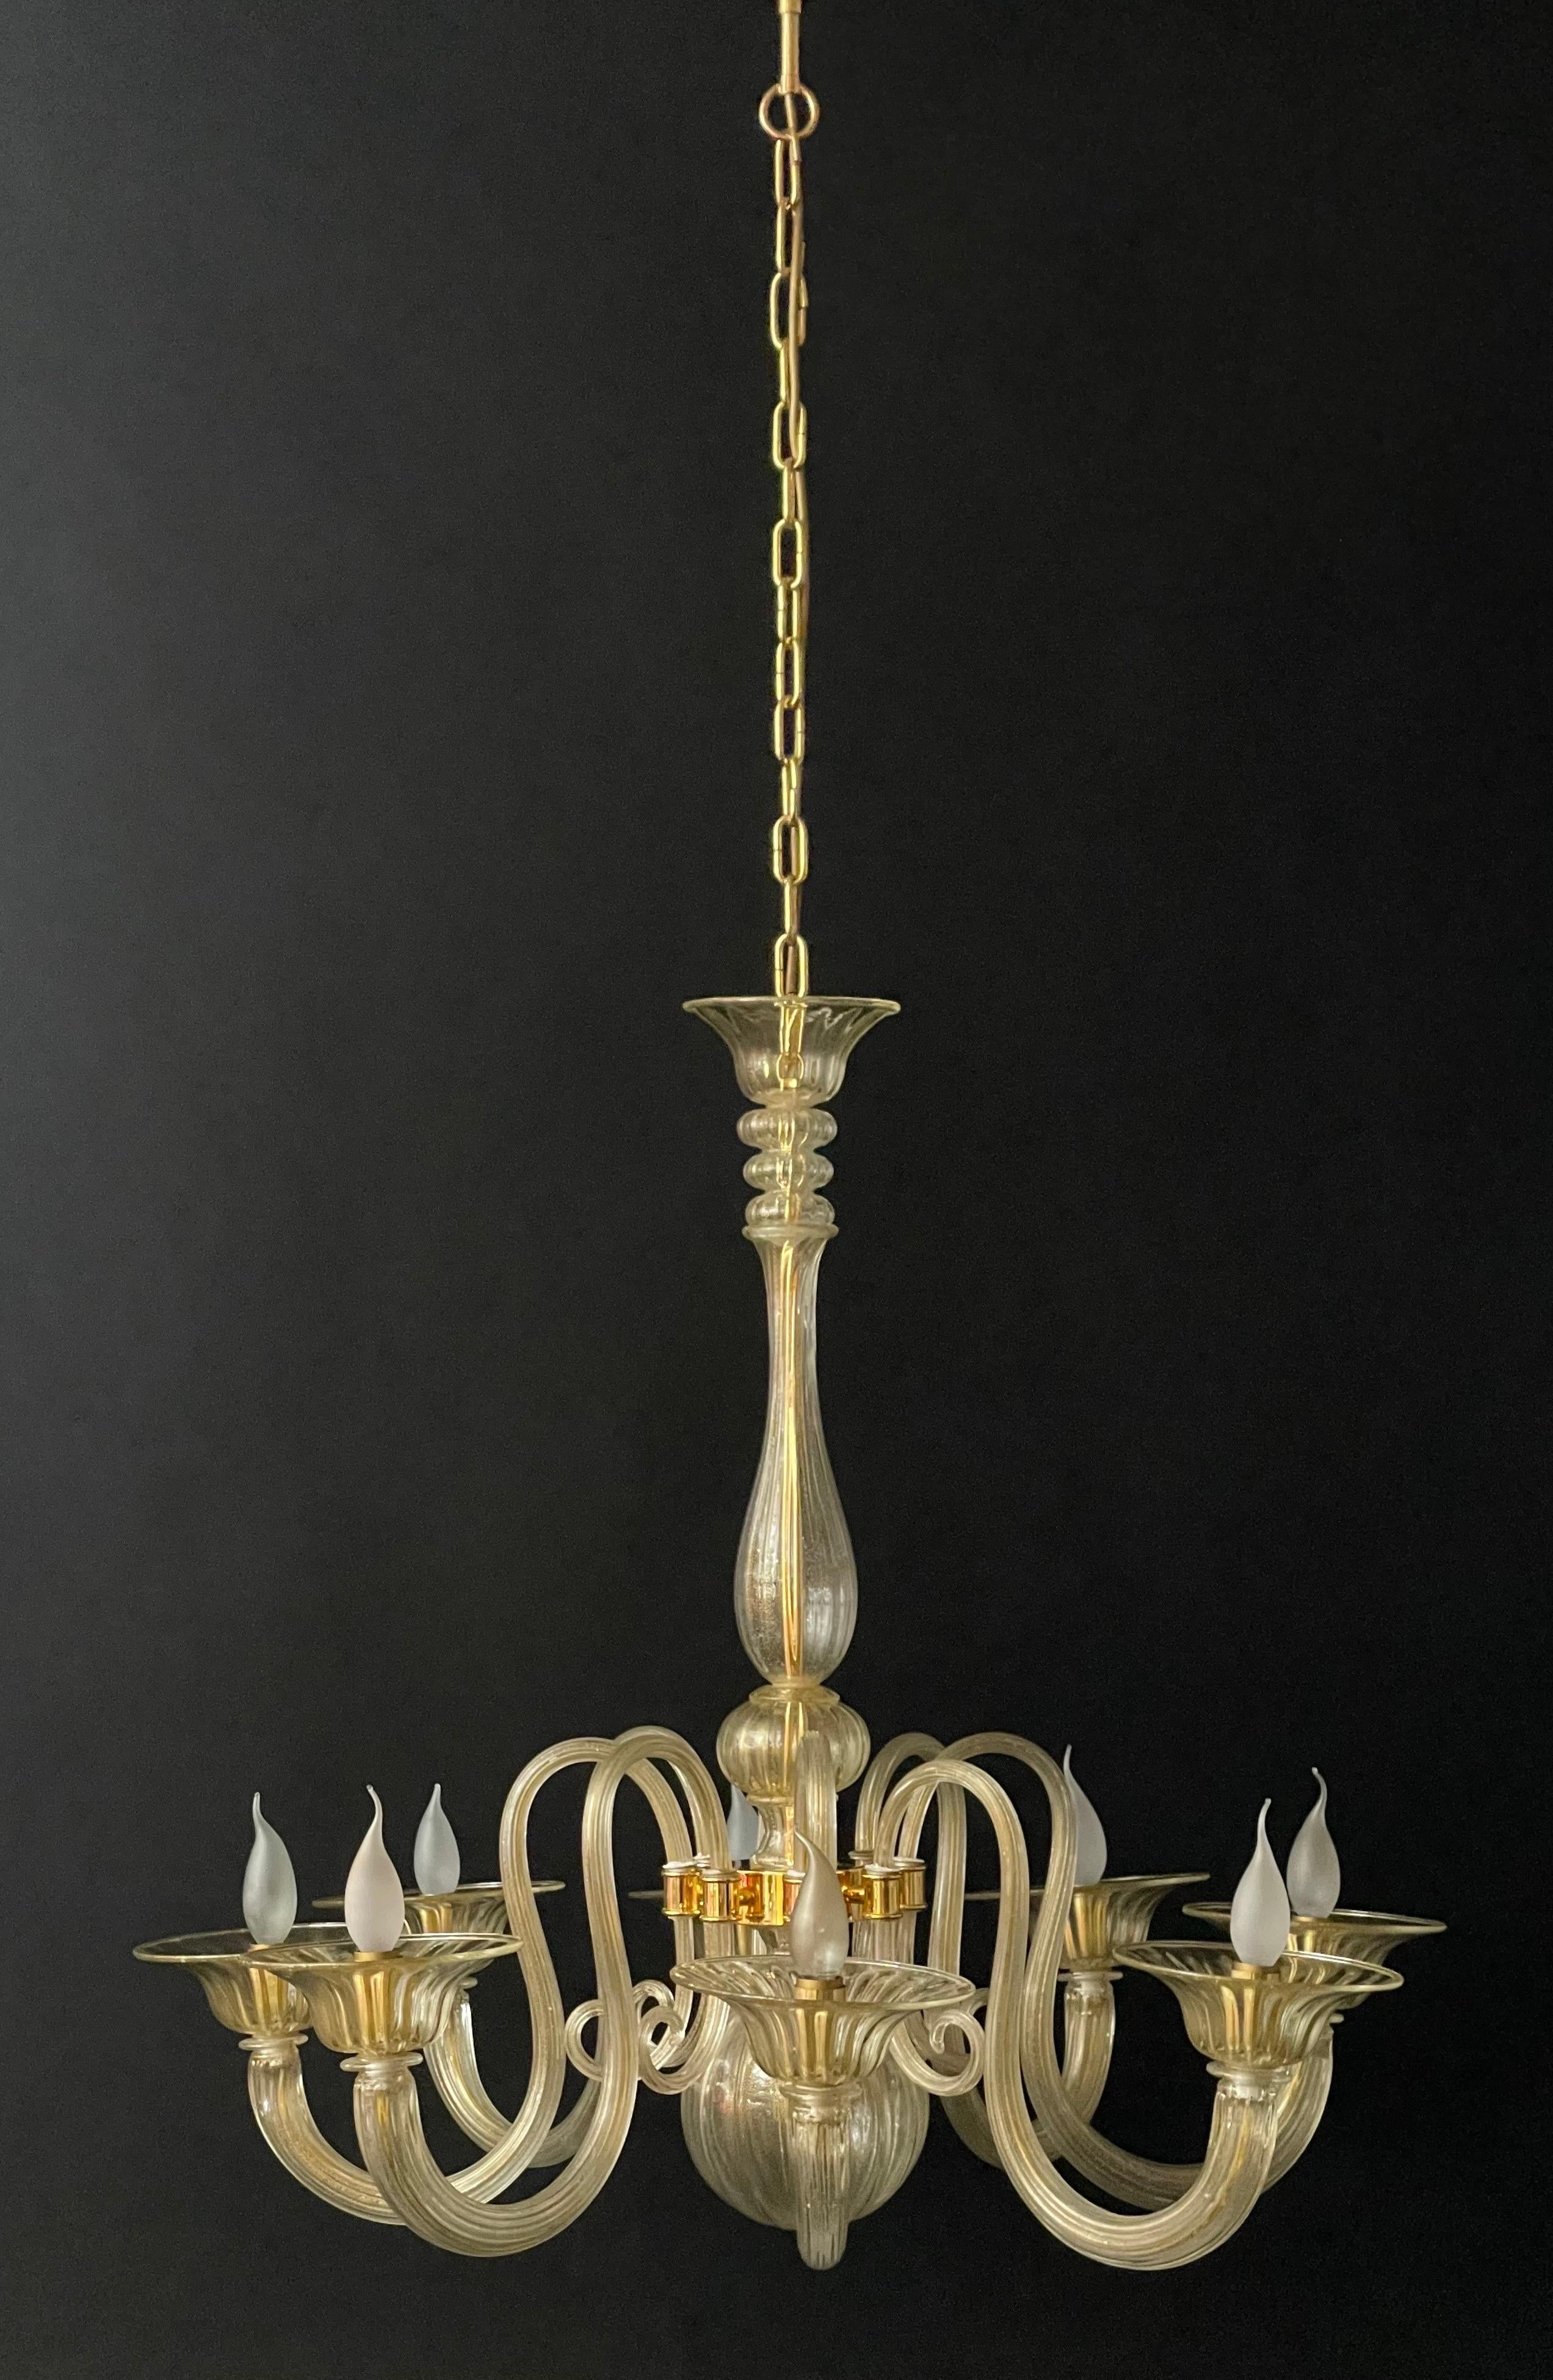 Mid-Century Modern Large Barovier Toso Gold Dusted Murano Glass Chandelier, circa 1960s For Sale